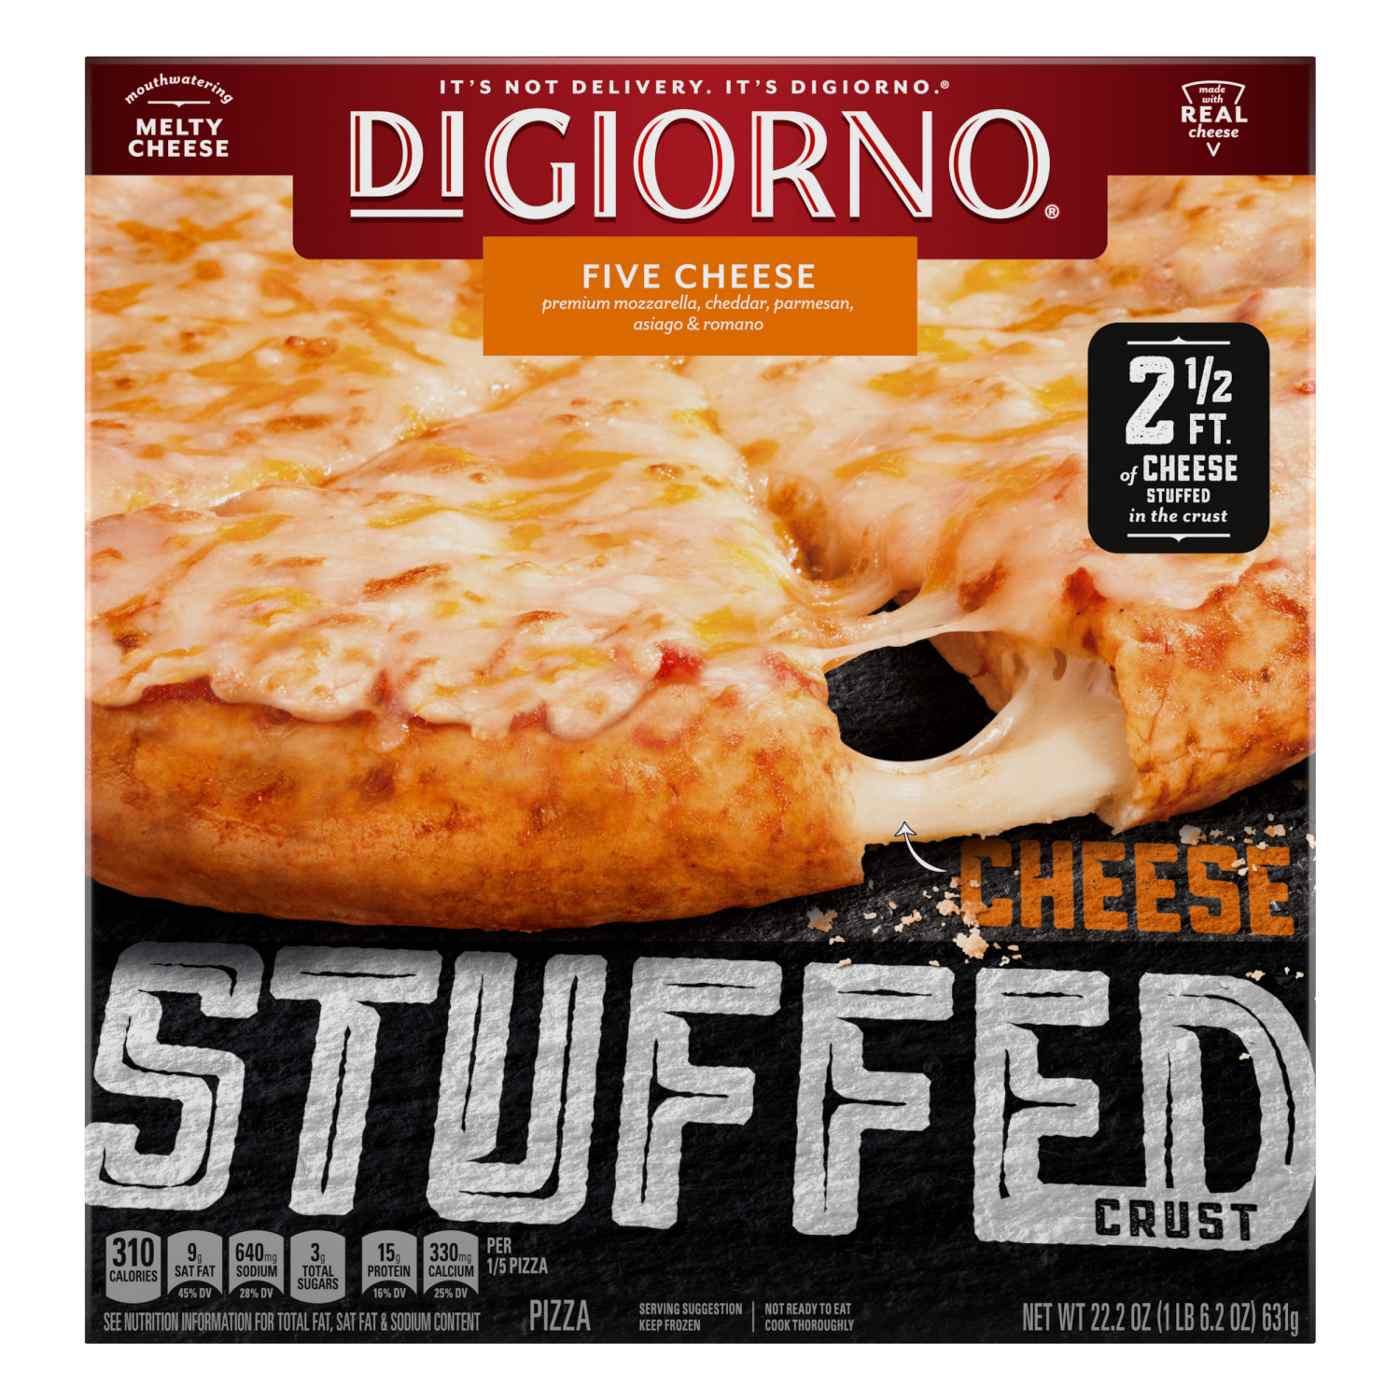 DiGiorno Cheese Stuffed Crust Frozen Pizza - Five Cheese; image 1 of 6